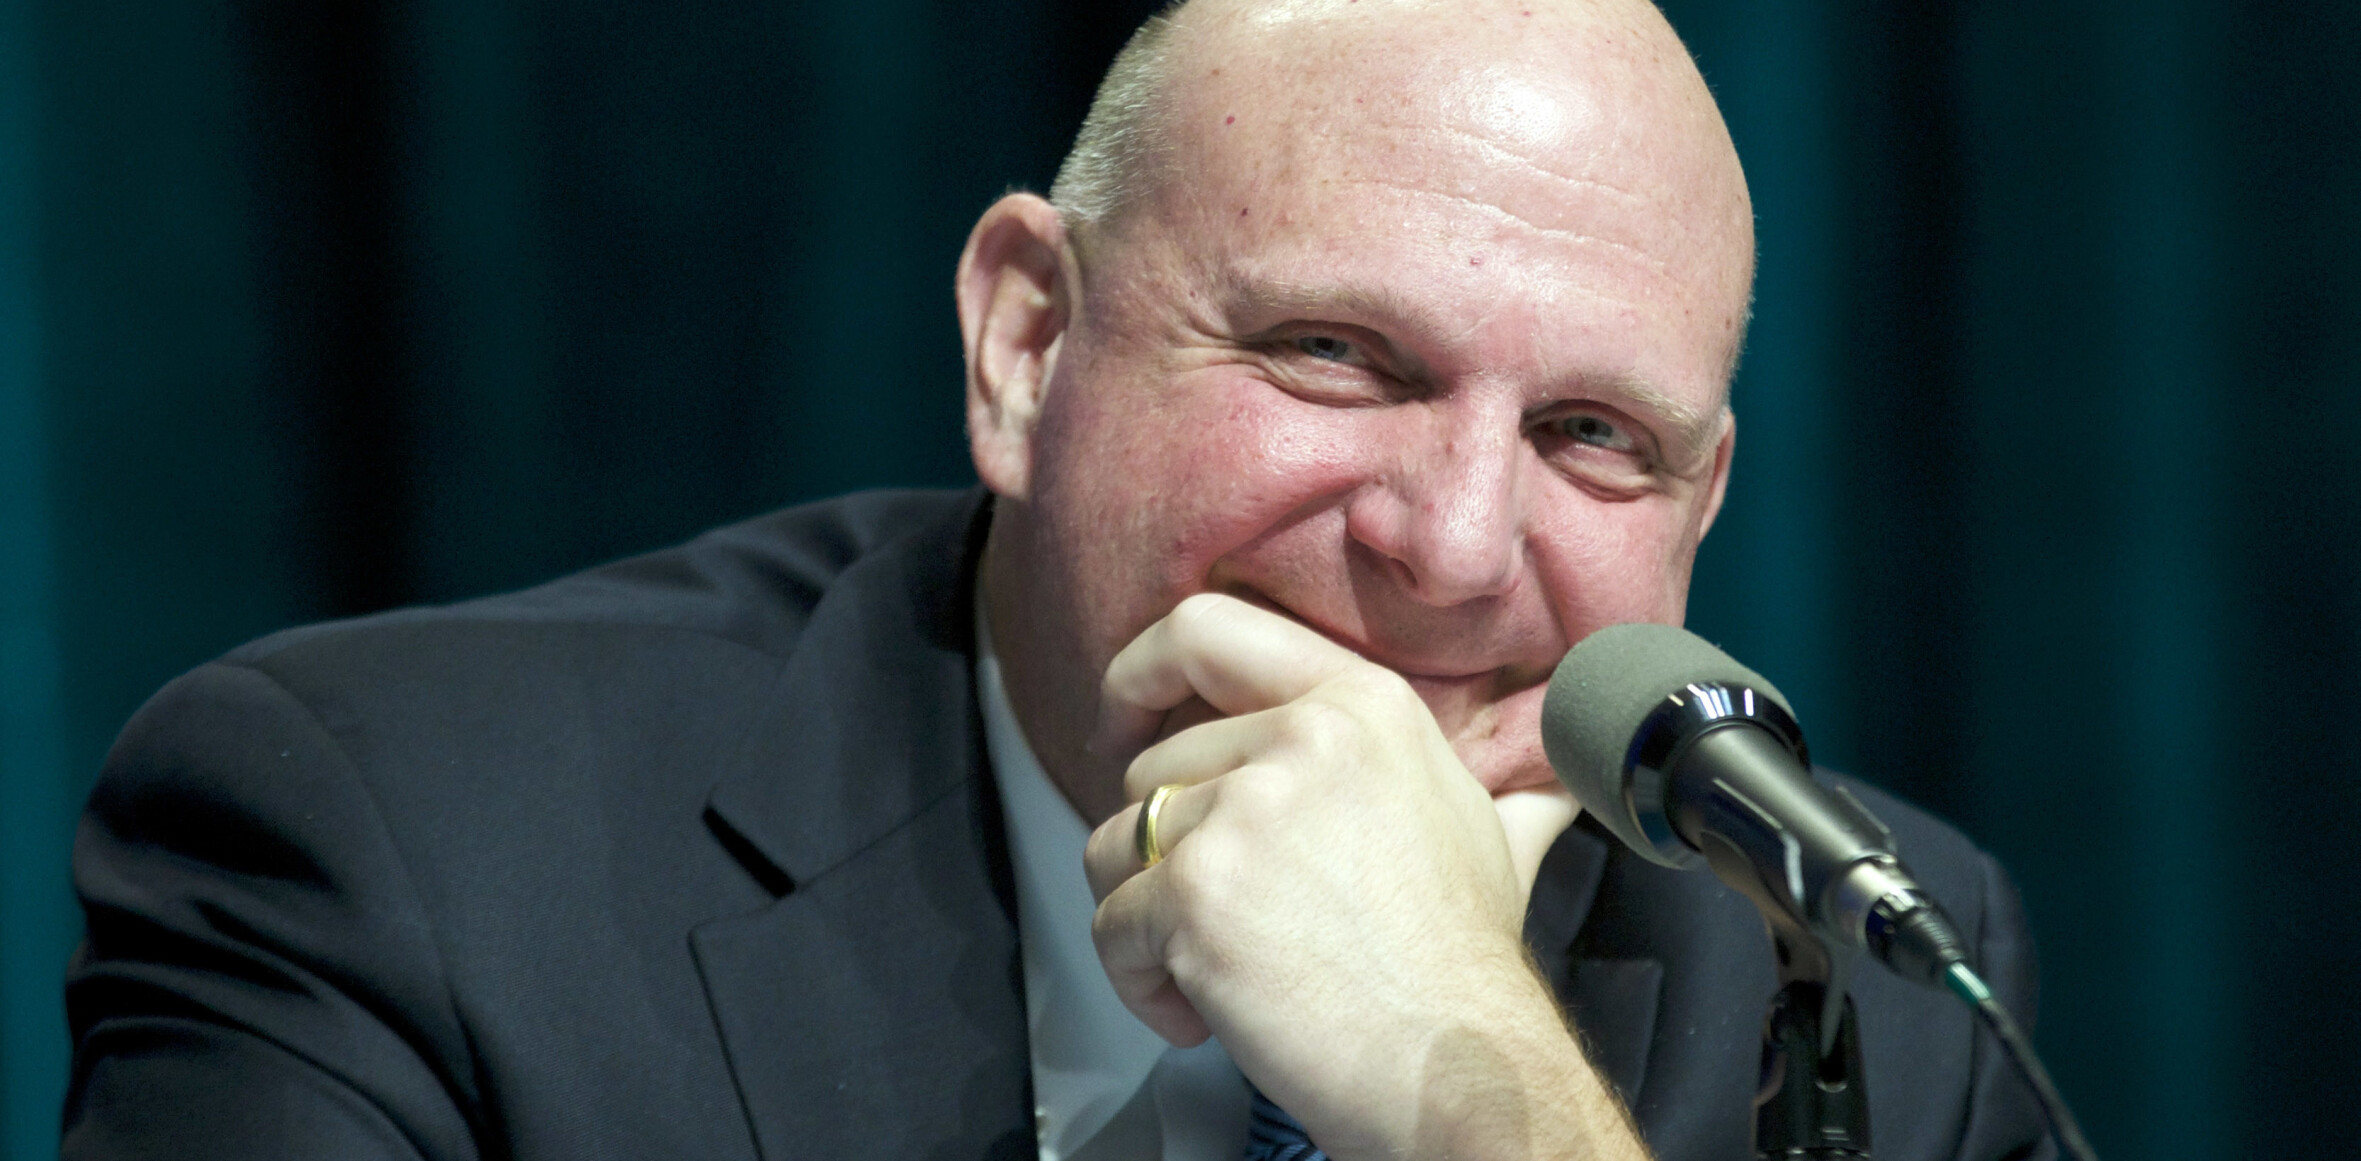 It’s confirmed: Former Microsoft CEO Steve Ballmer is buying the LA Clippers NBA team for $2 billion